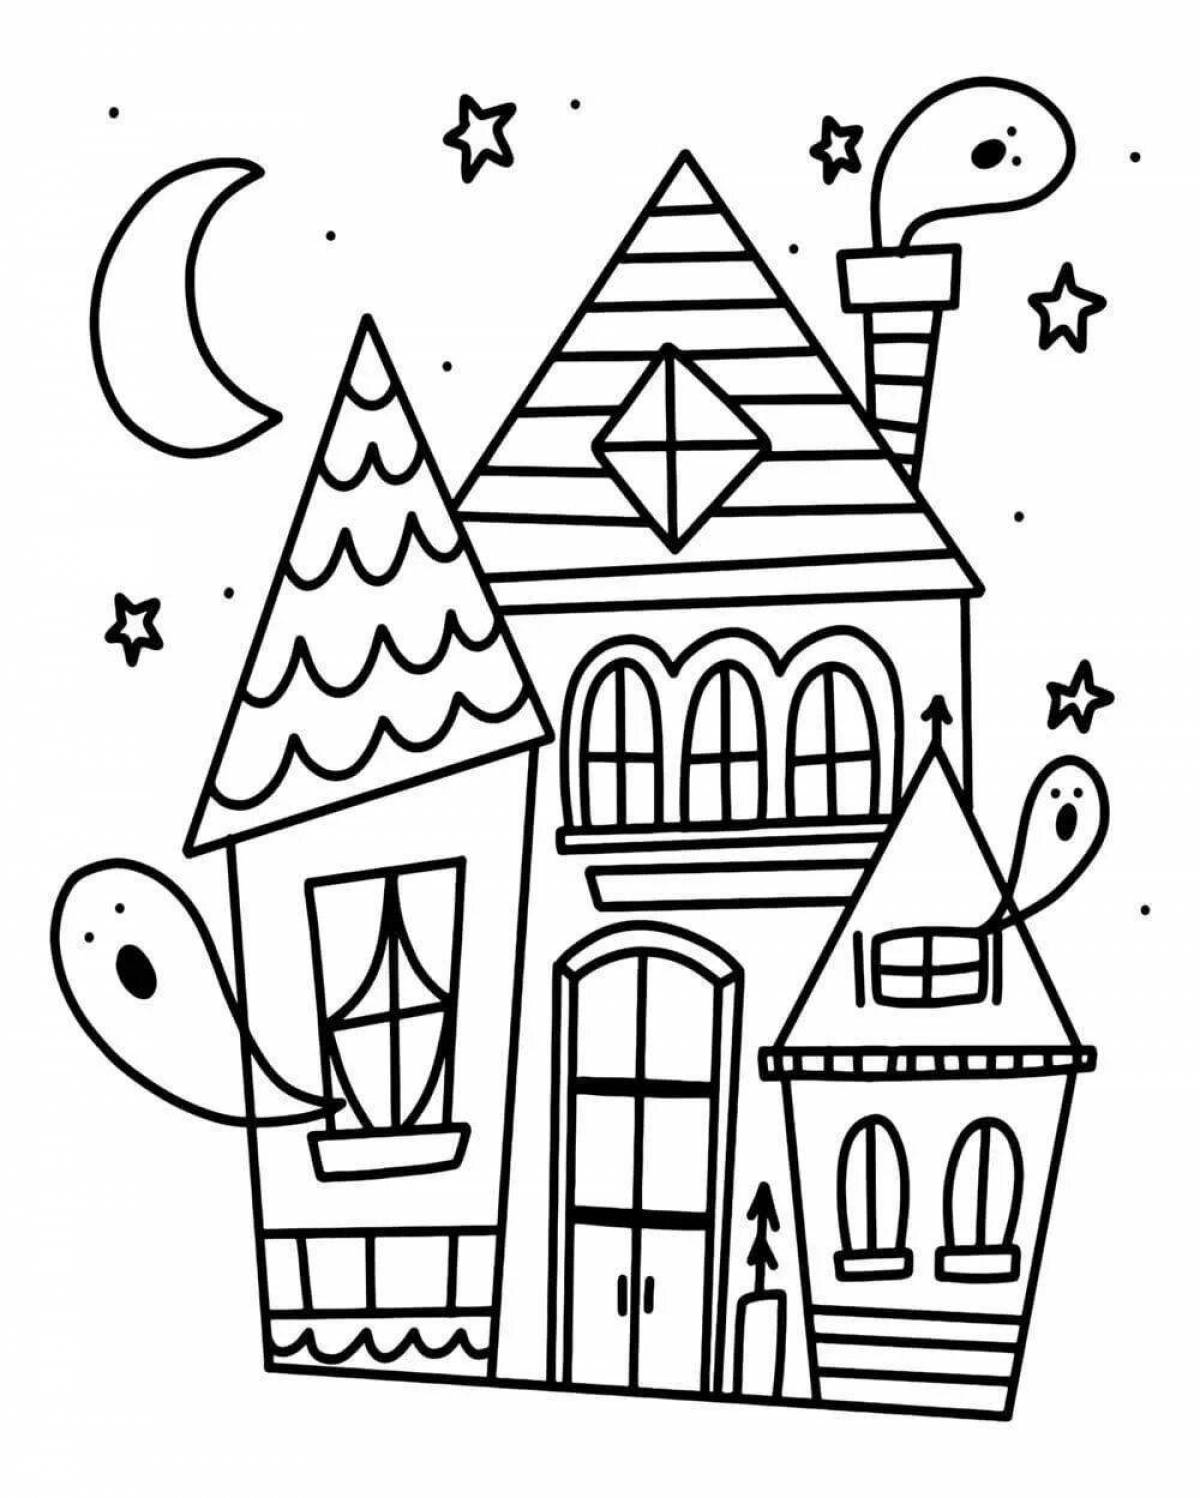 Coloring page strange haunted house